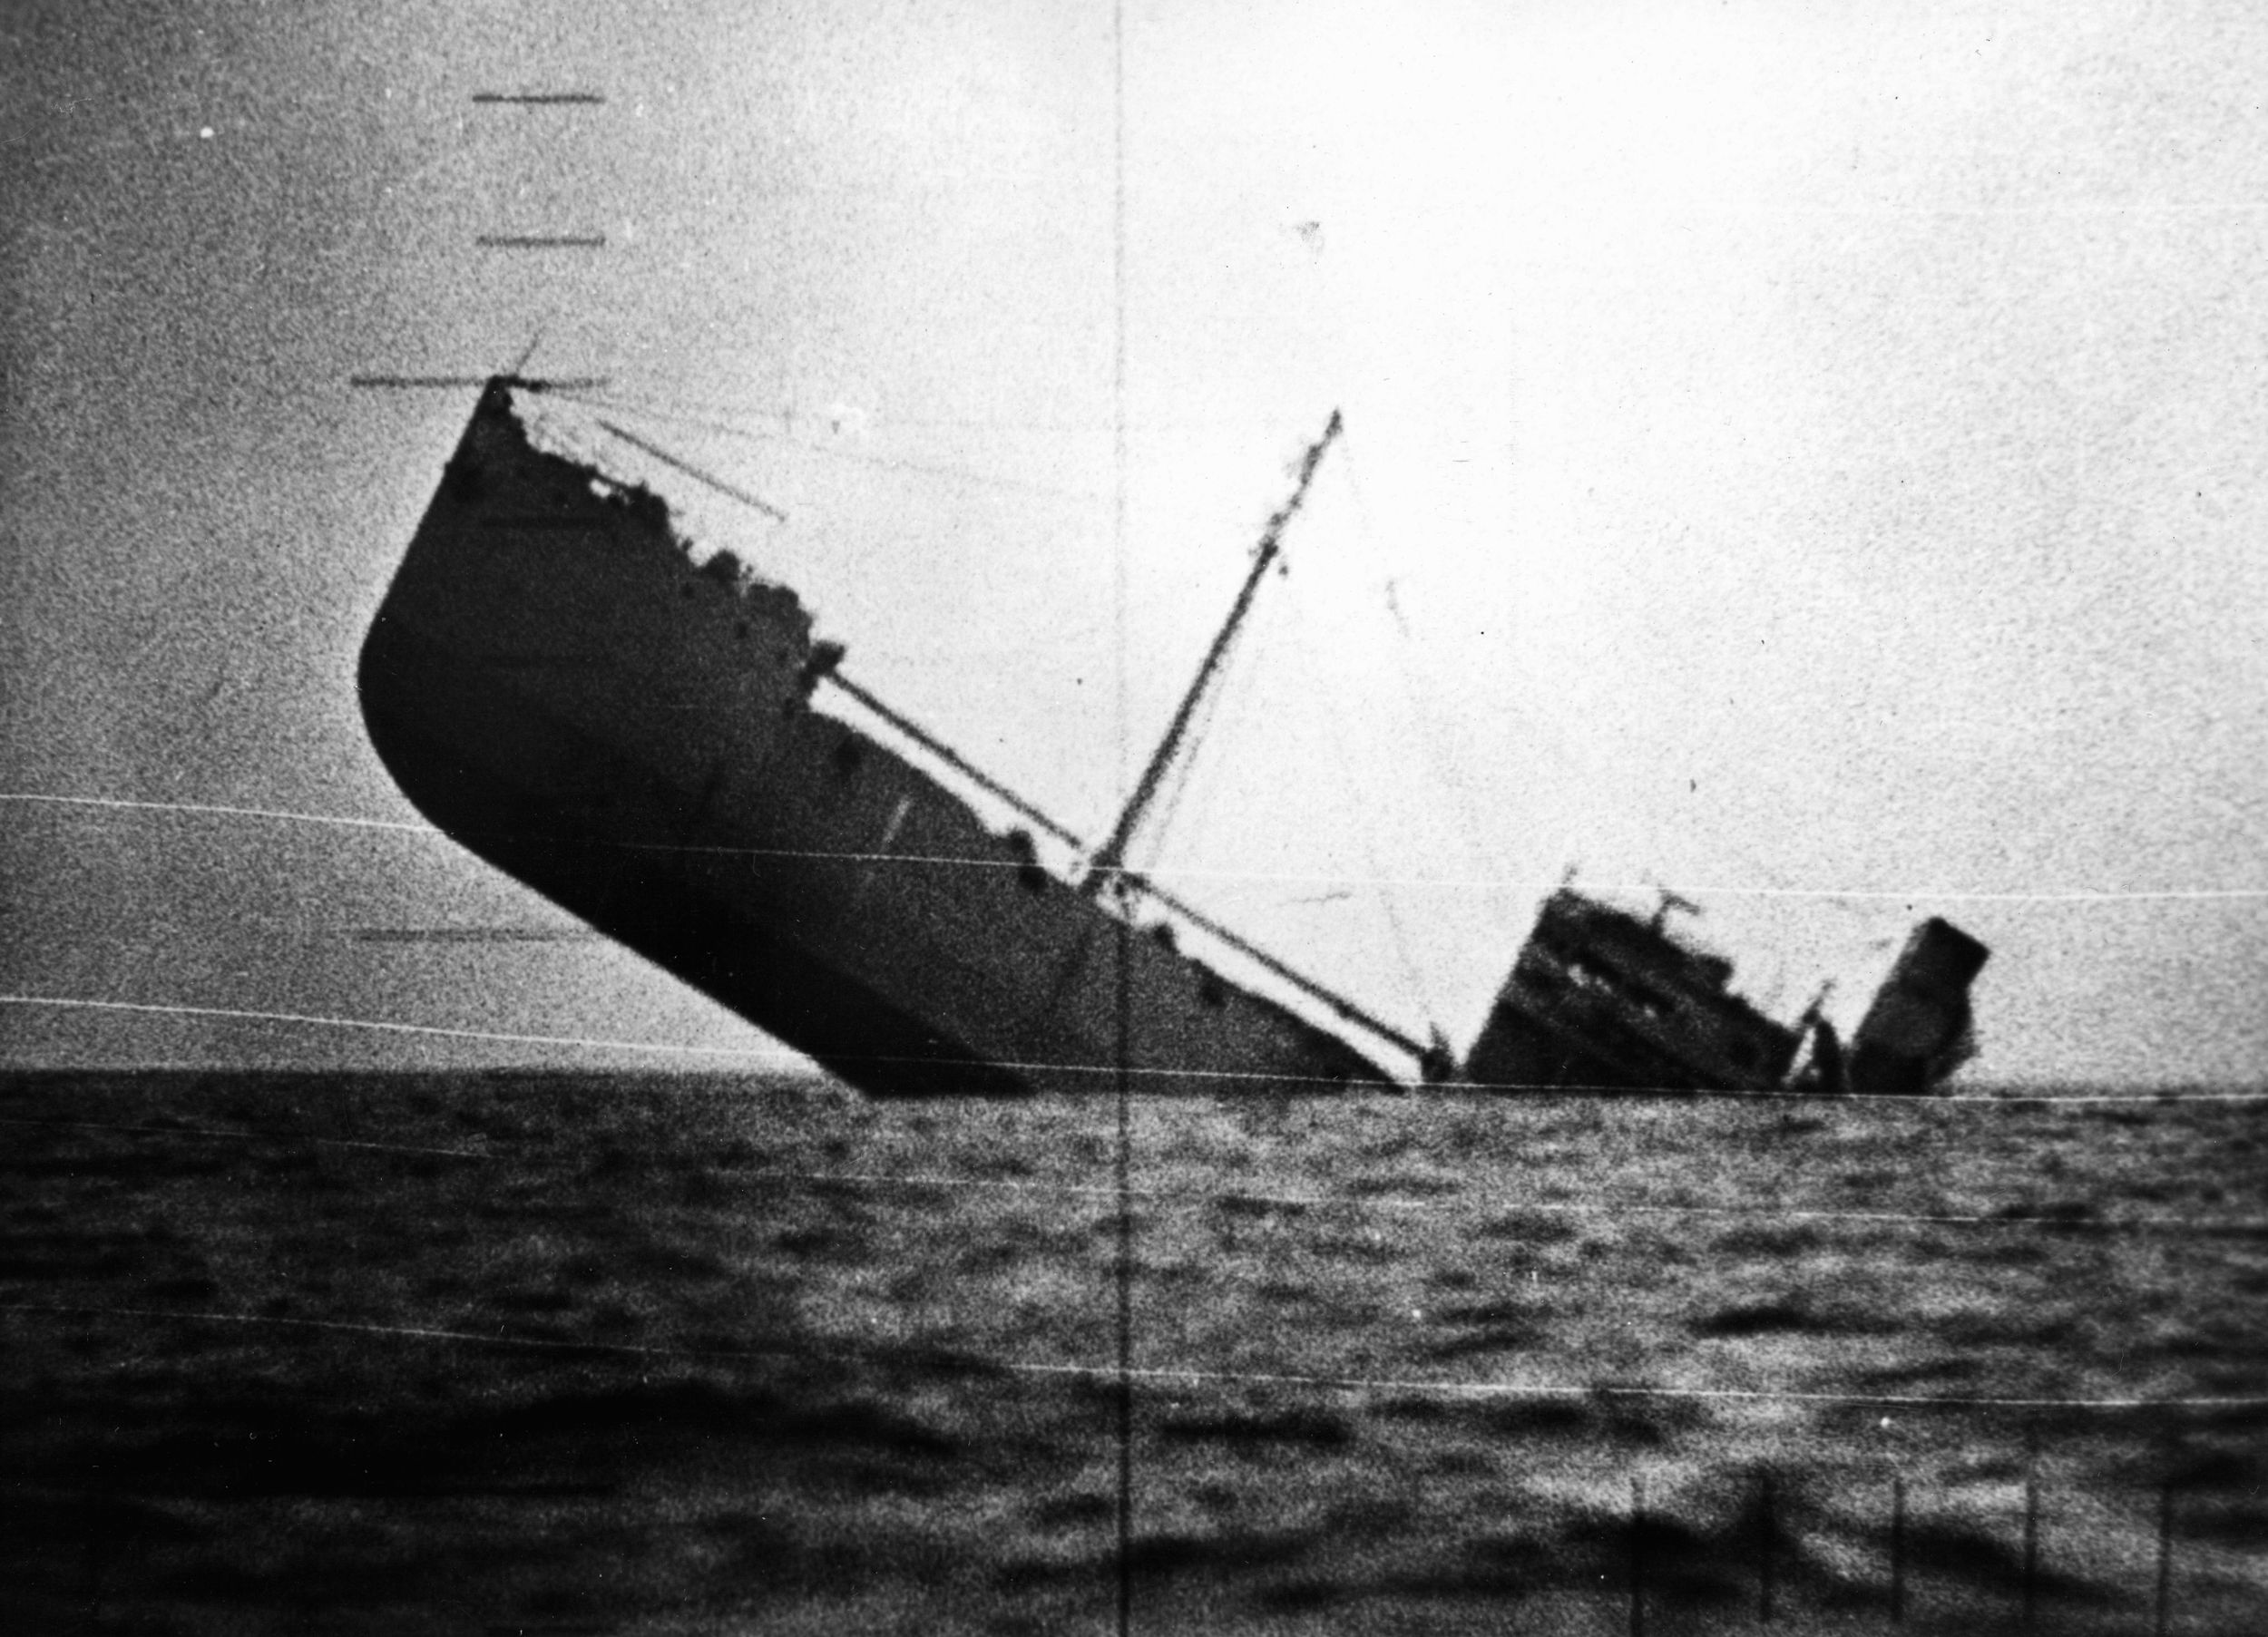 A photo taken through the periscope of an American submarine shows a Japanese merchant ship in its death throes. This sinking was the 1,142nd such loss for the Japanese of the war since the bombing of Pearl Harbor on December 7, 1941. 